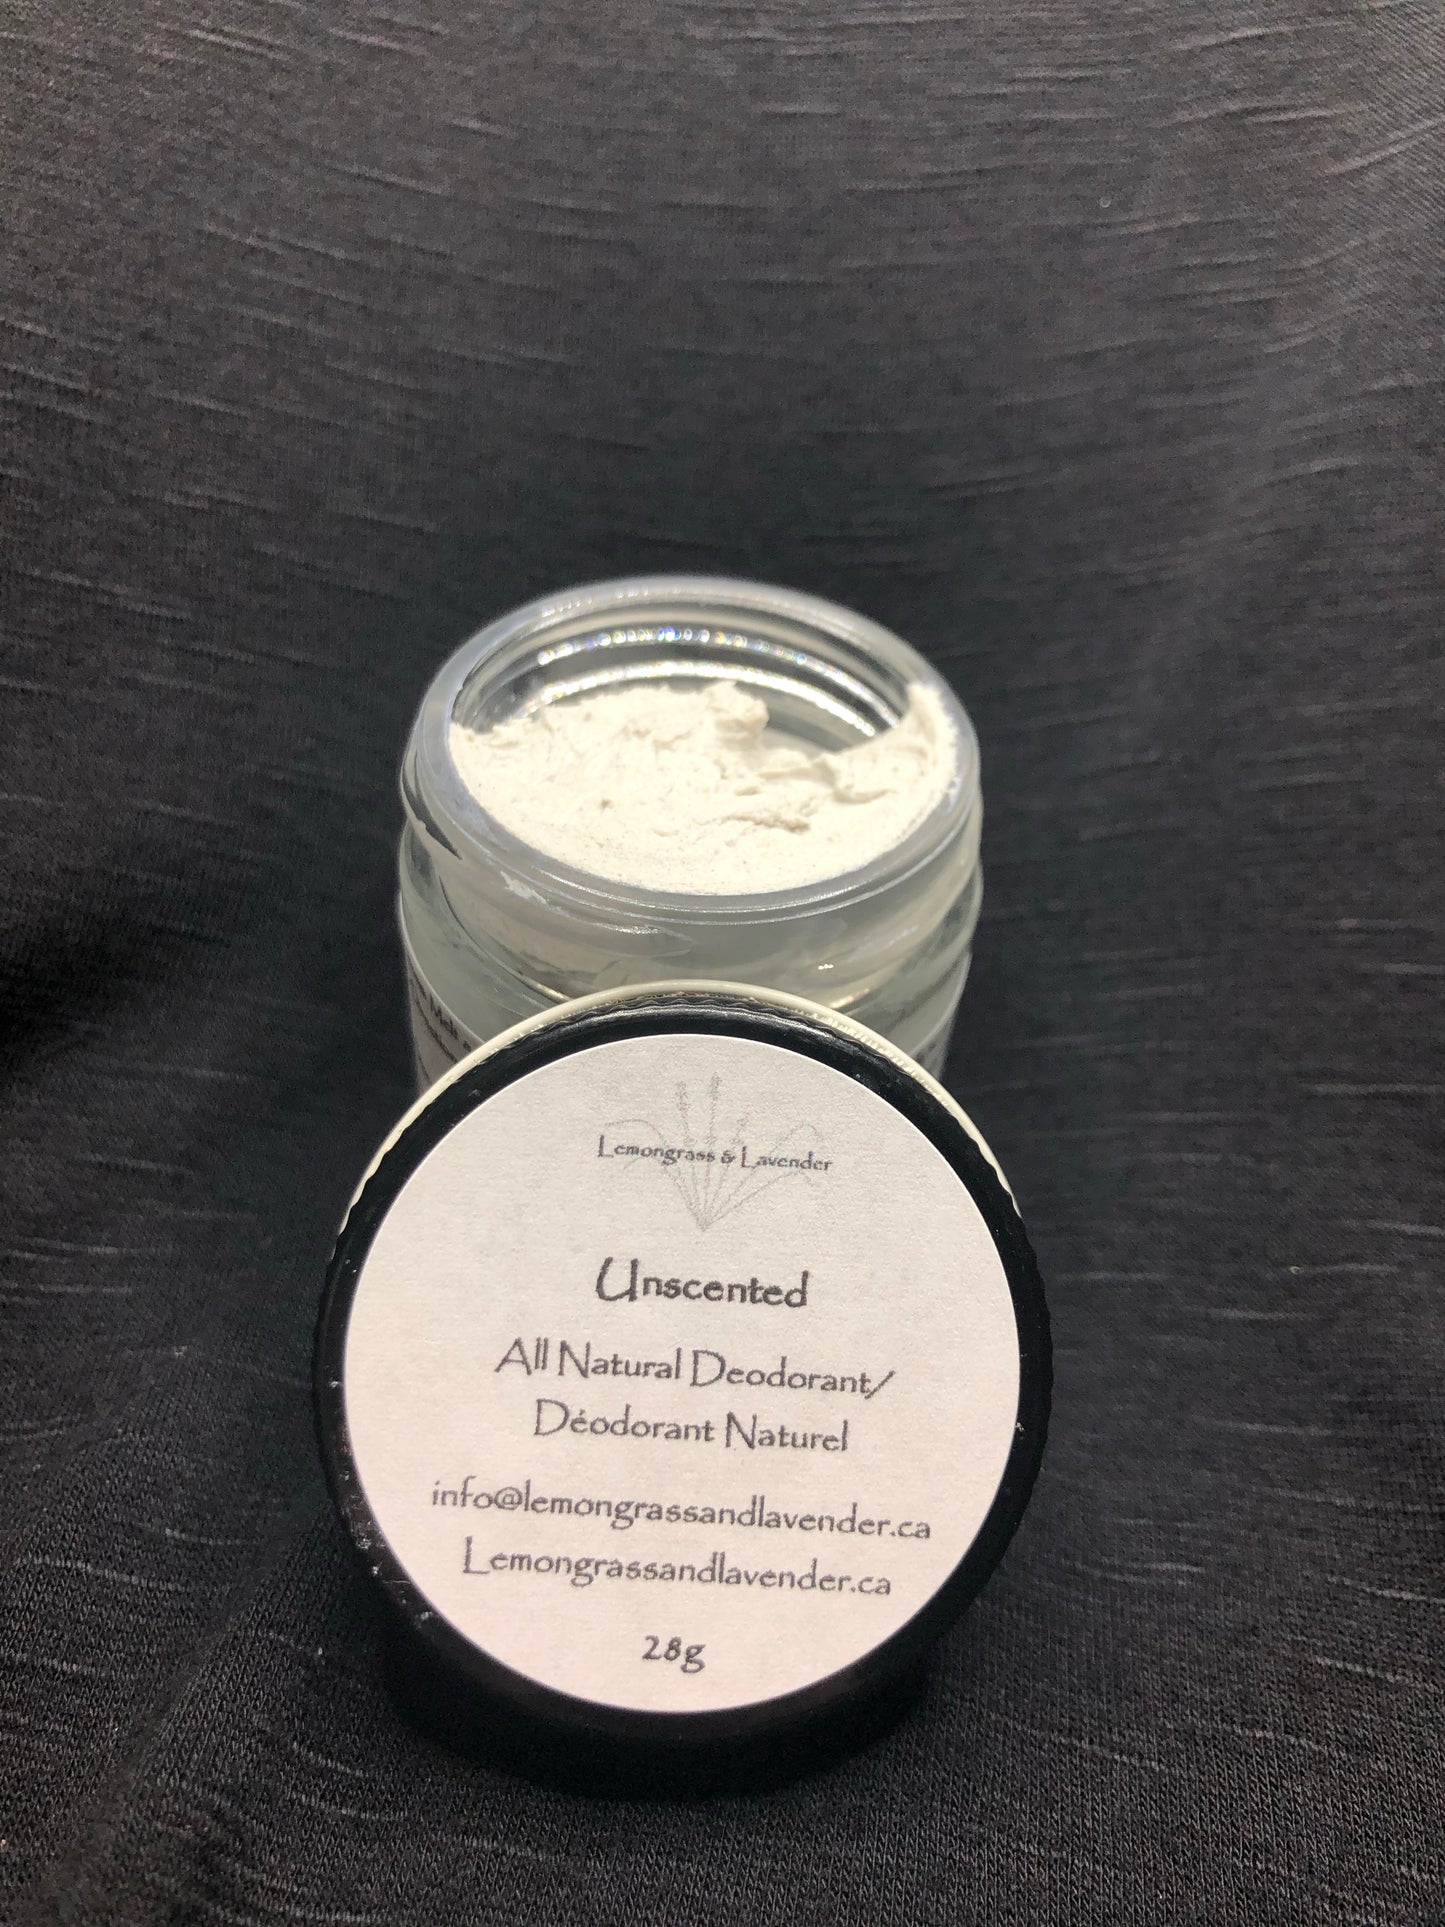 All Natural Deodorant - Unscented